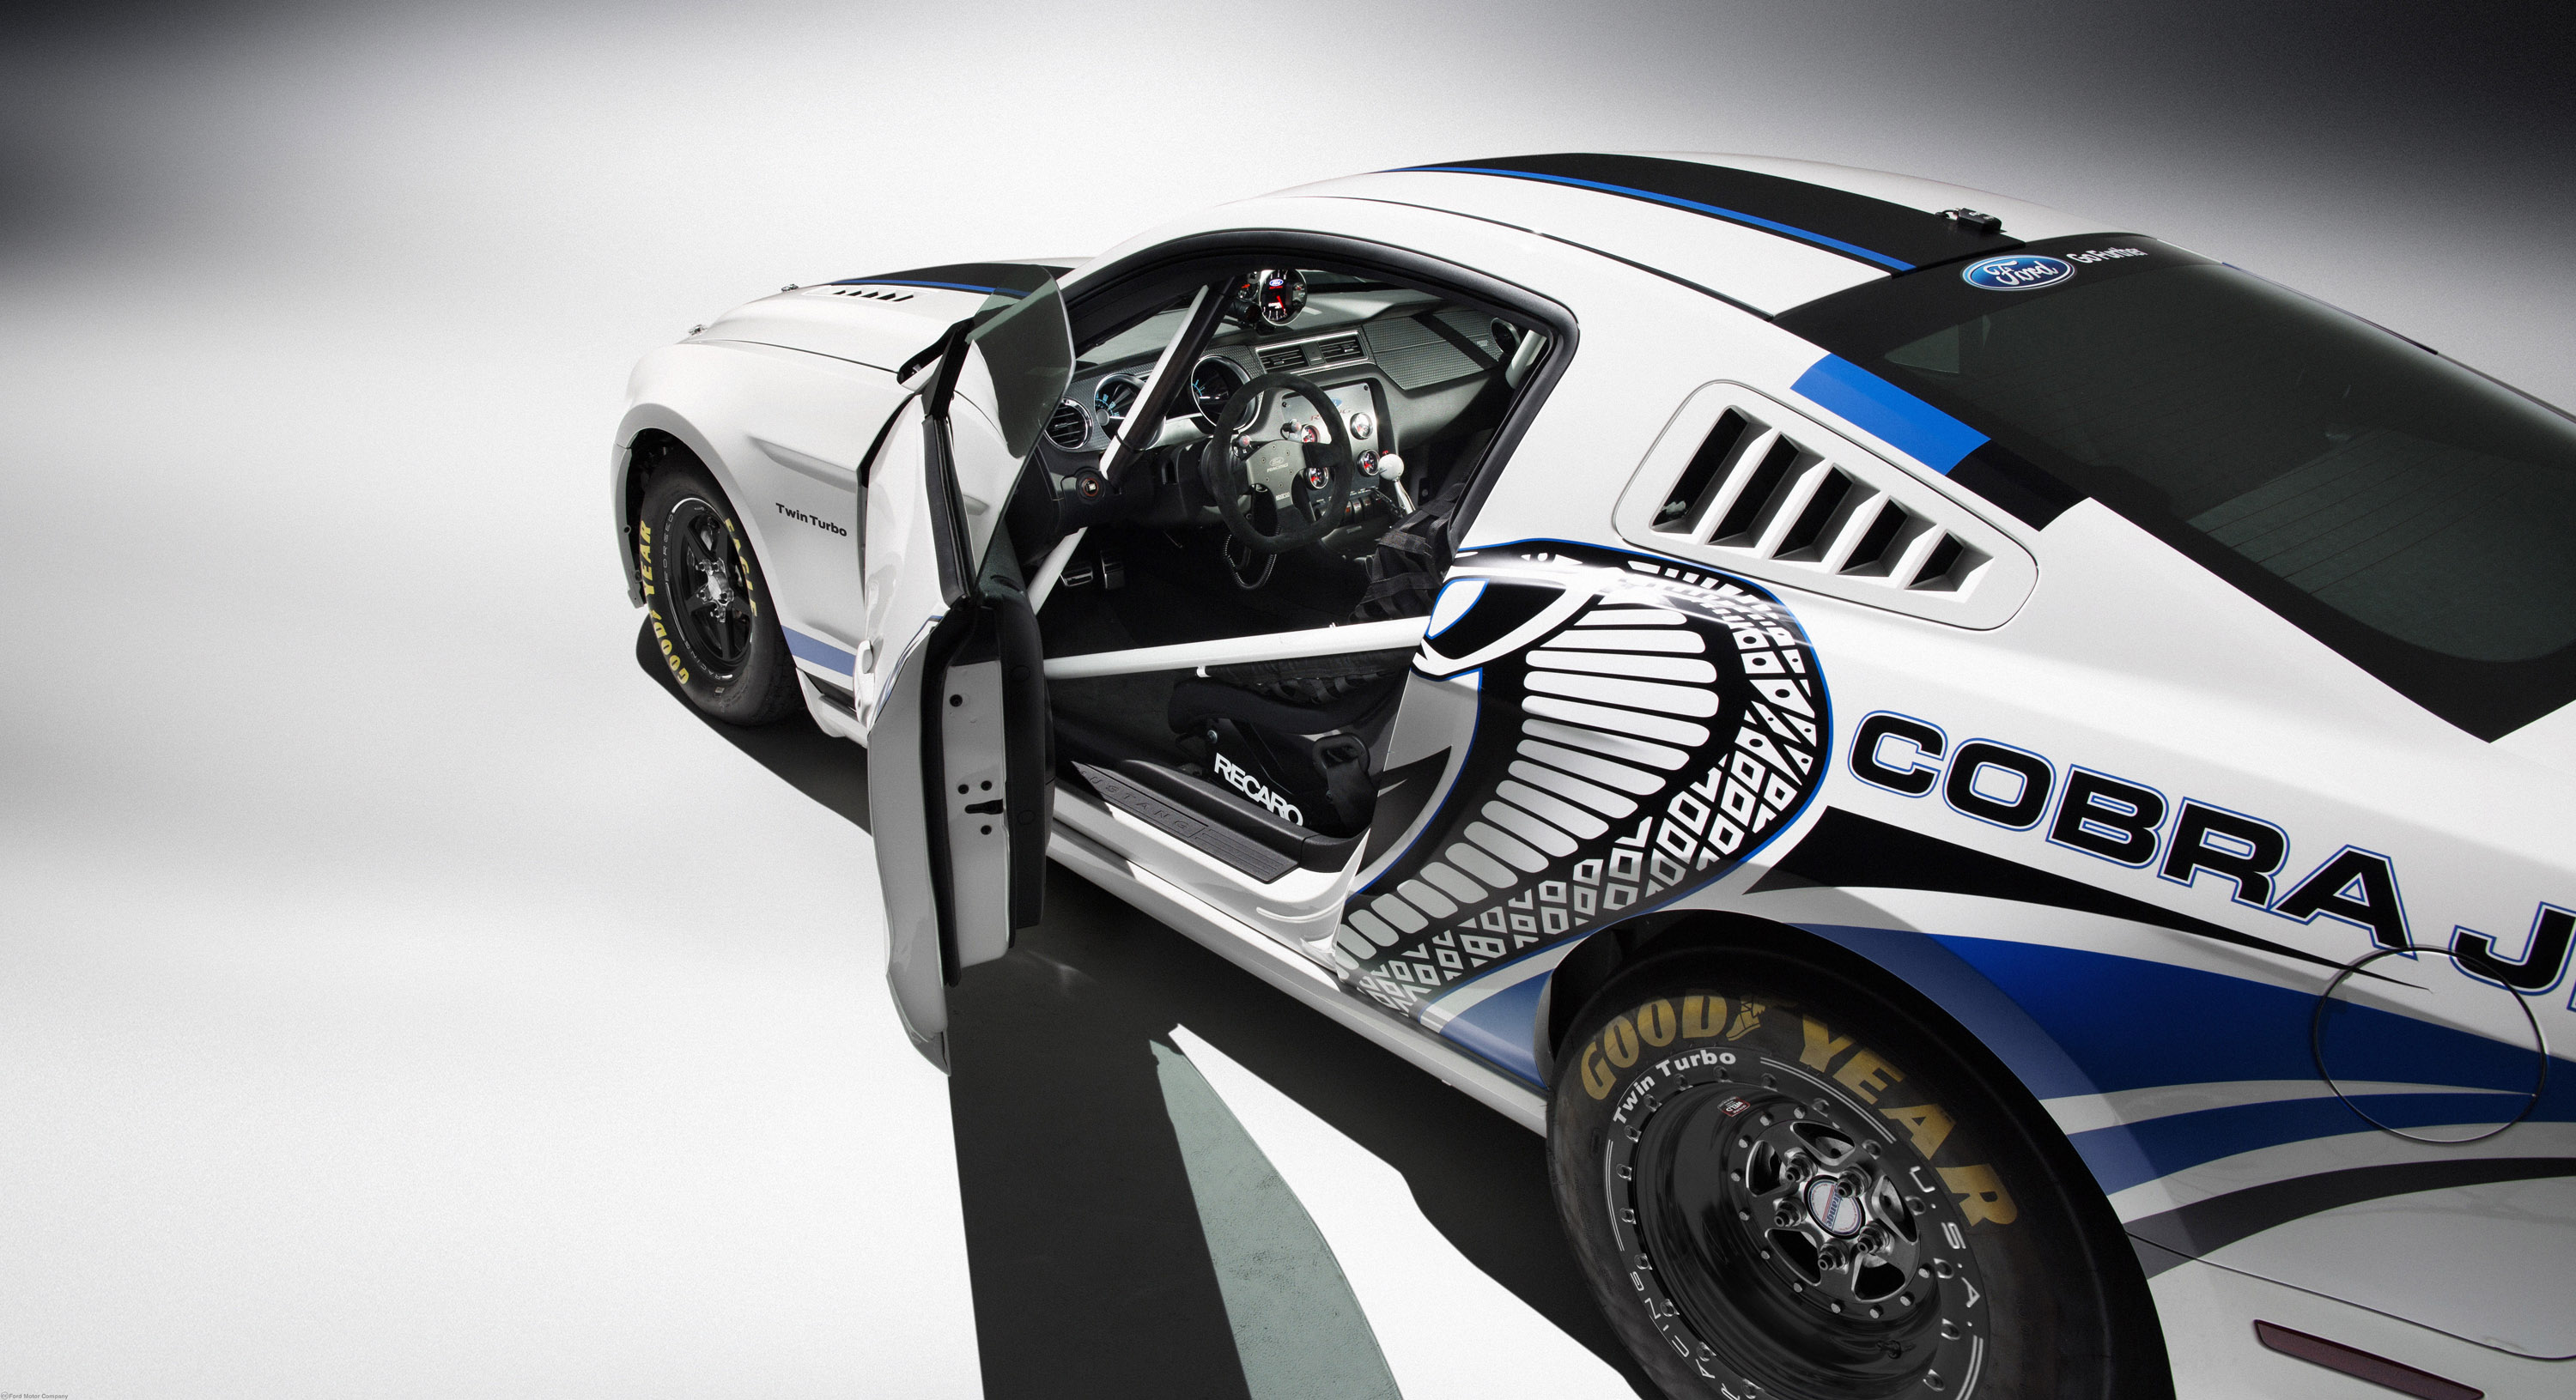 2013, Ford, Mustang, Cobra, Jet, Twin turbo, Concept, Race, Racing, Hot, Rod, Rods, Muscle, Interior Wallpaper